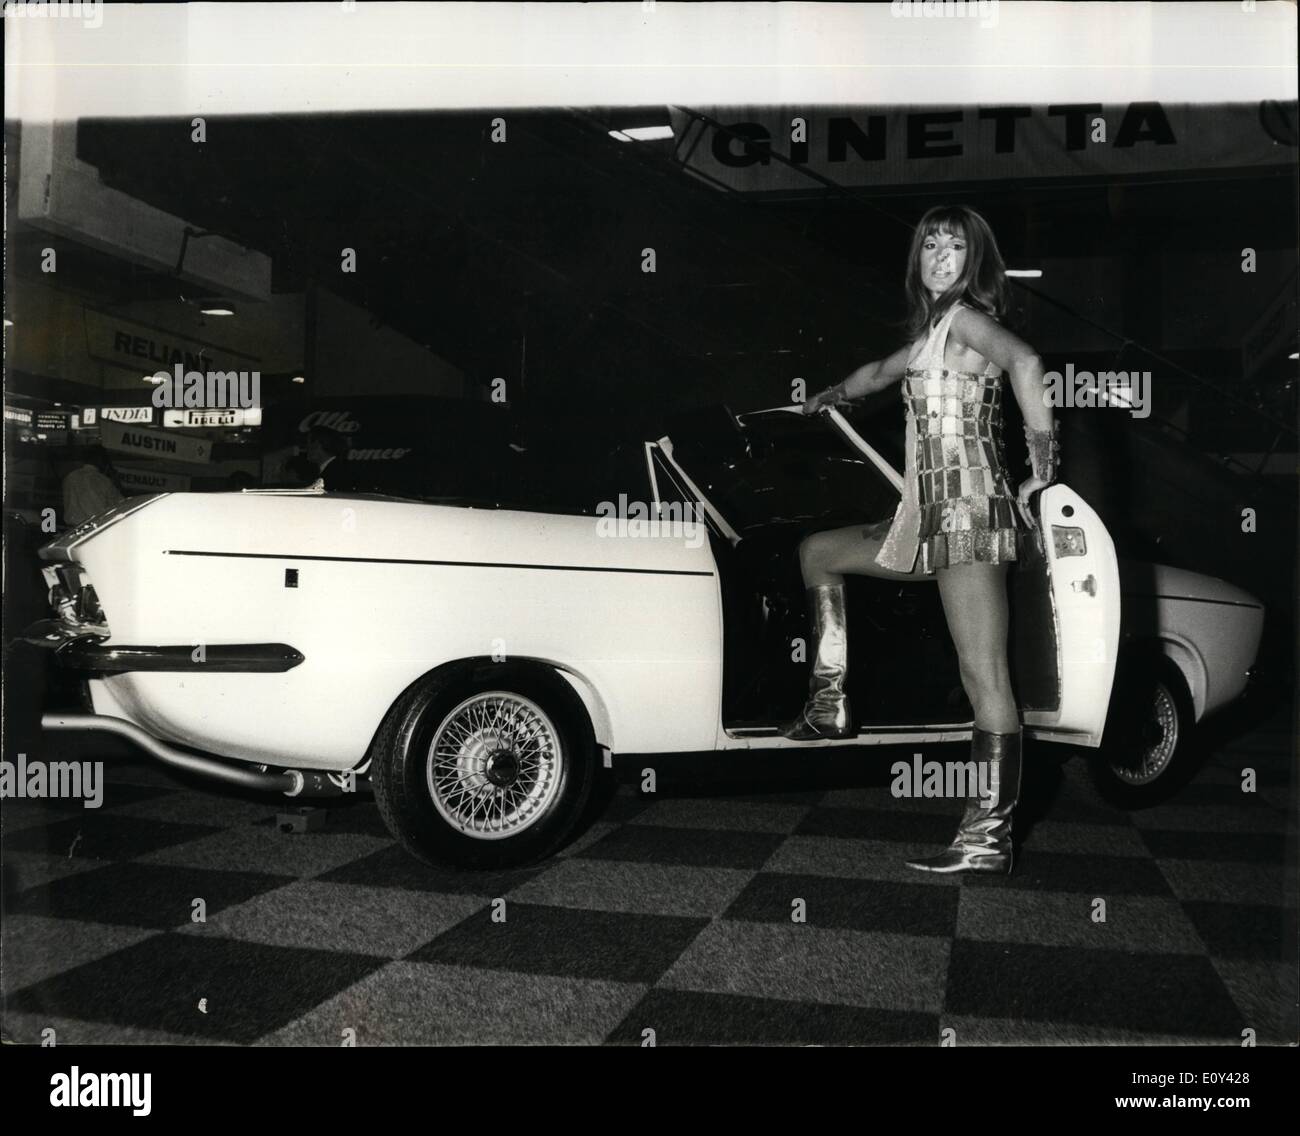 Oct. 10, 1968 - Preview Of The Motor Show: Photo Shows Pictured at the Preview of the Motor Show, which opens at Earl's Court tomorrow, is the highest performance saloon car ever produced by Rootes - the Sunbeam Rapier H120. Stock Photo